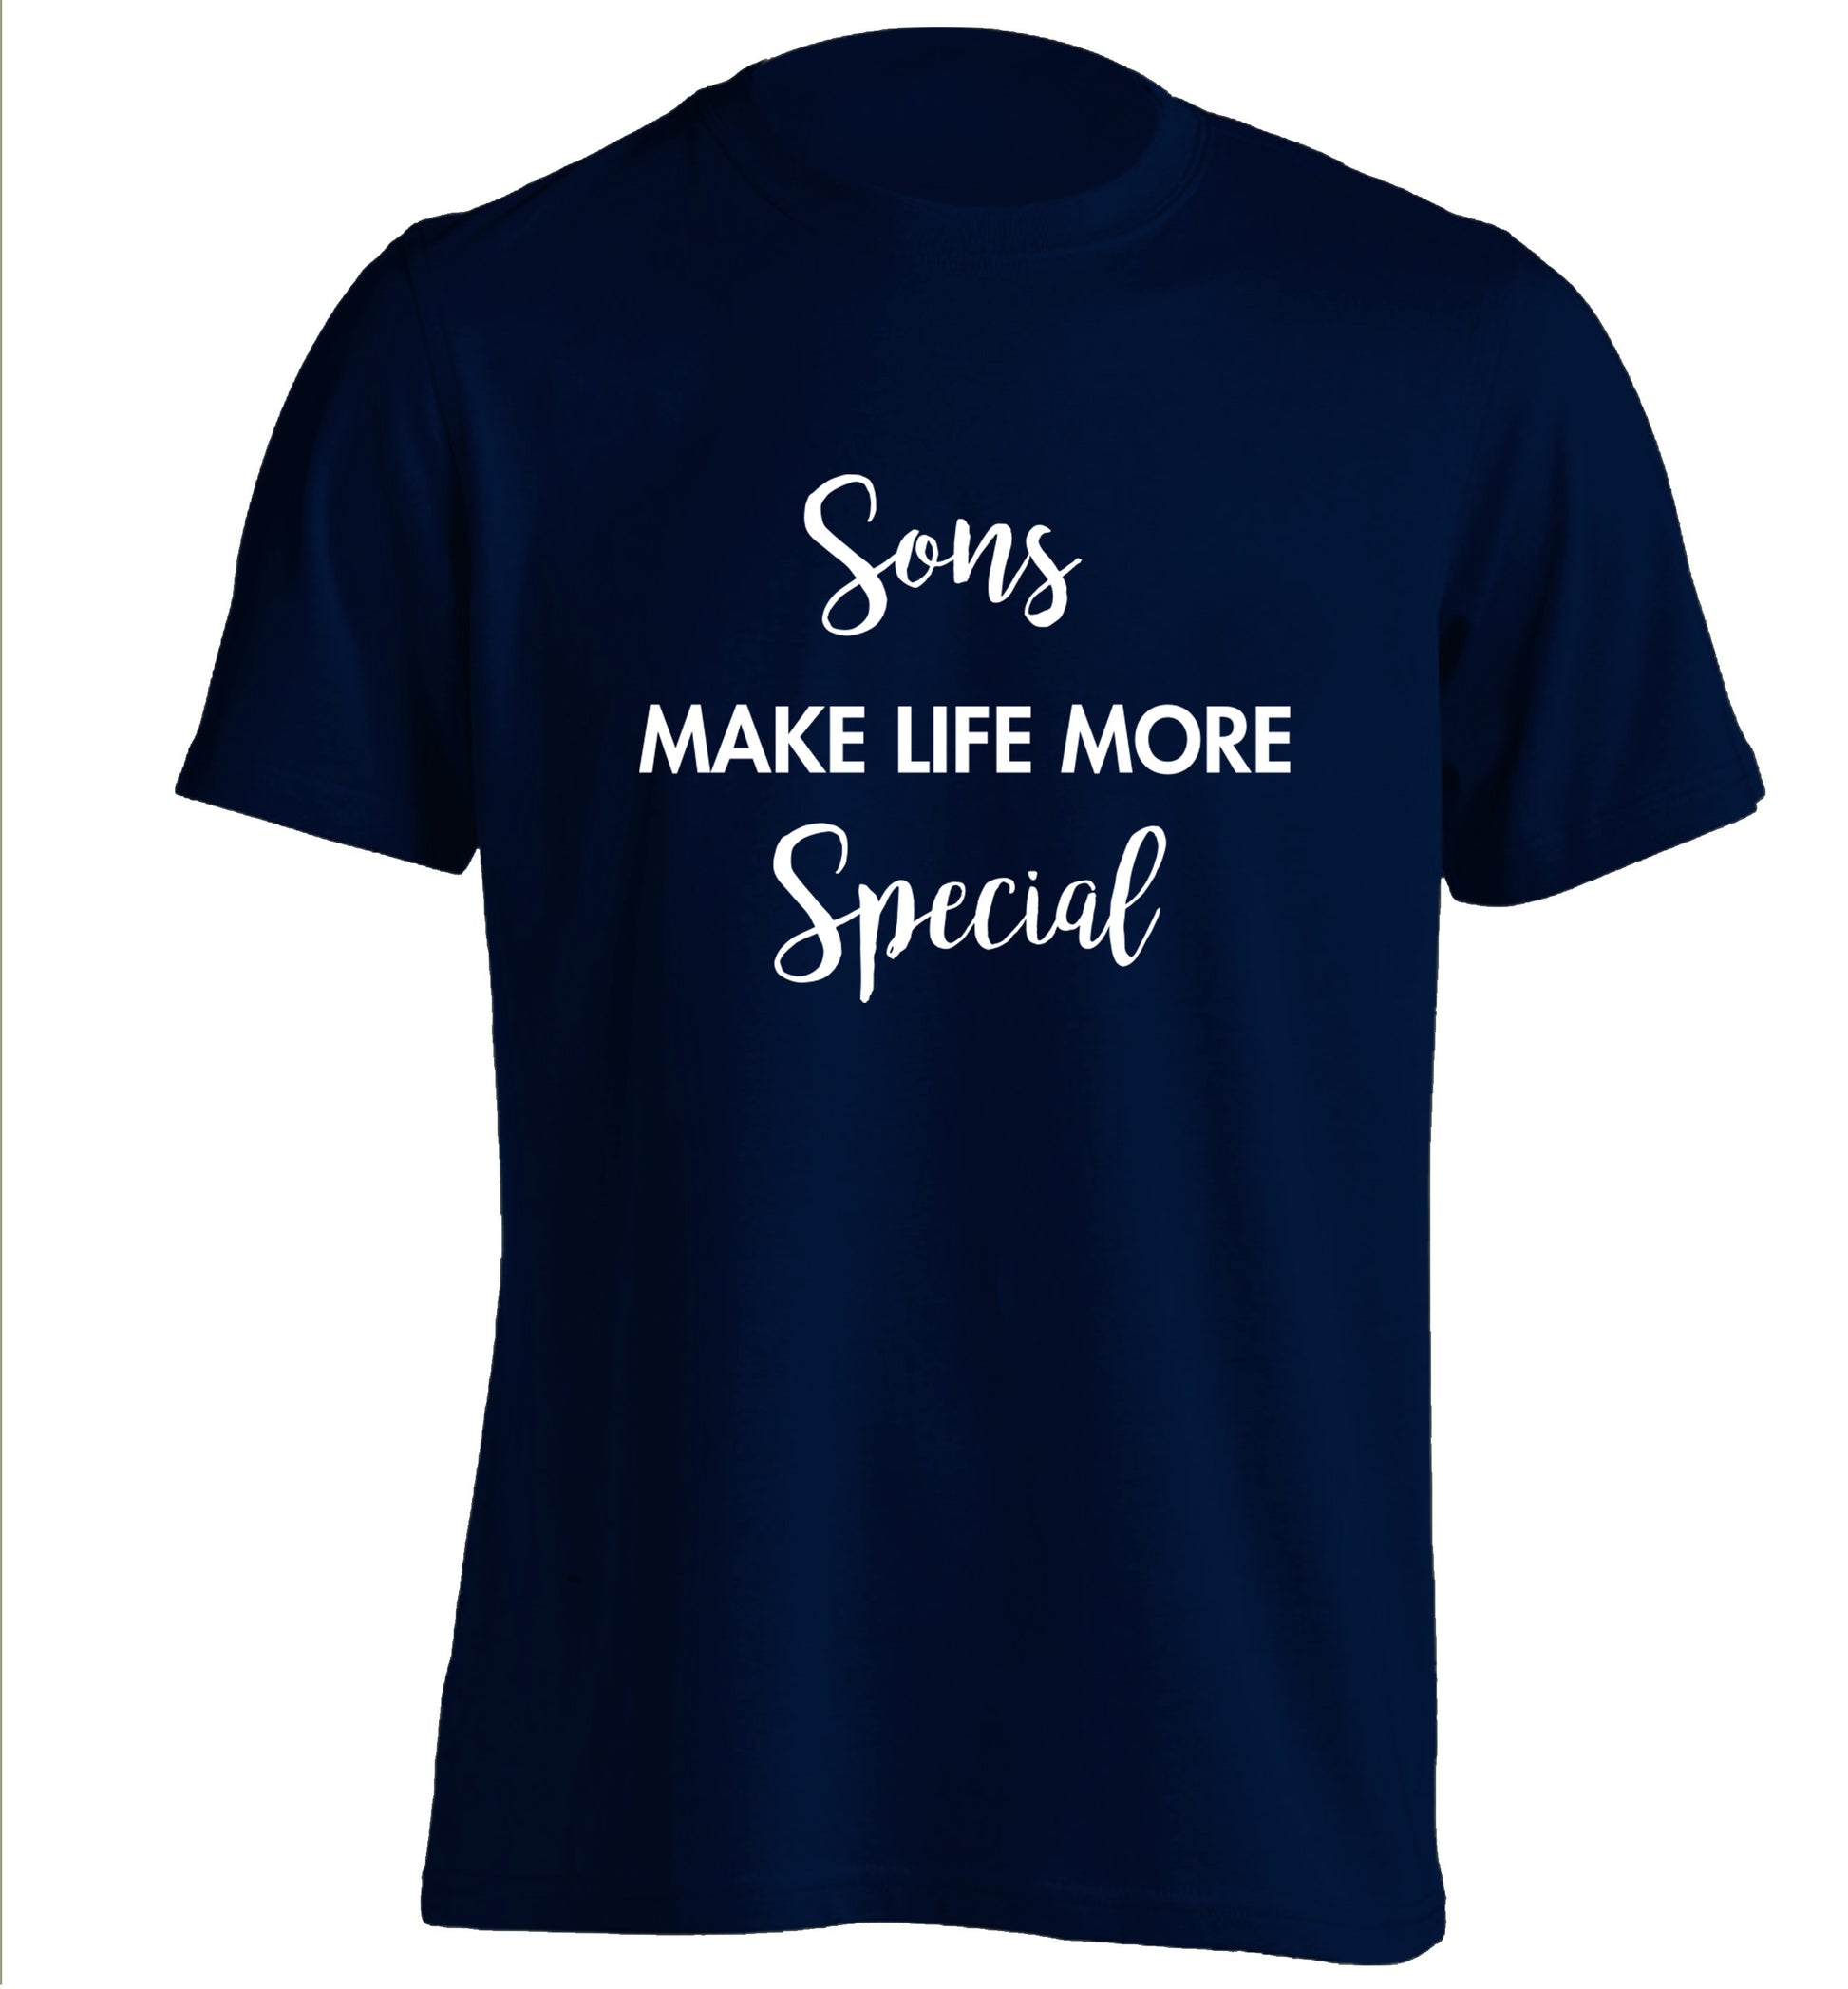 Sons make life more special adults unisex navy Tshirt 2XL